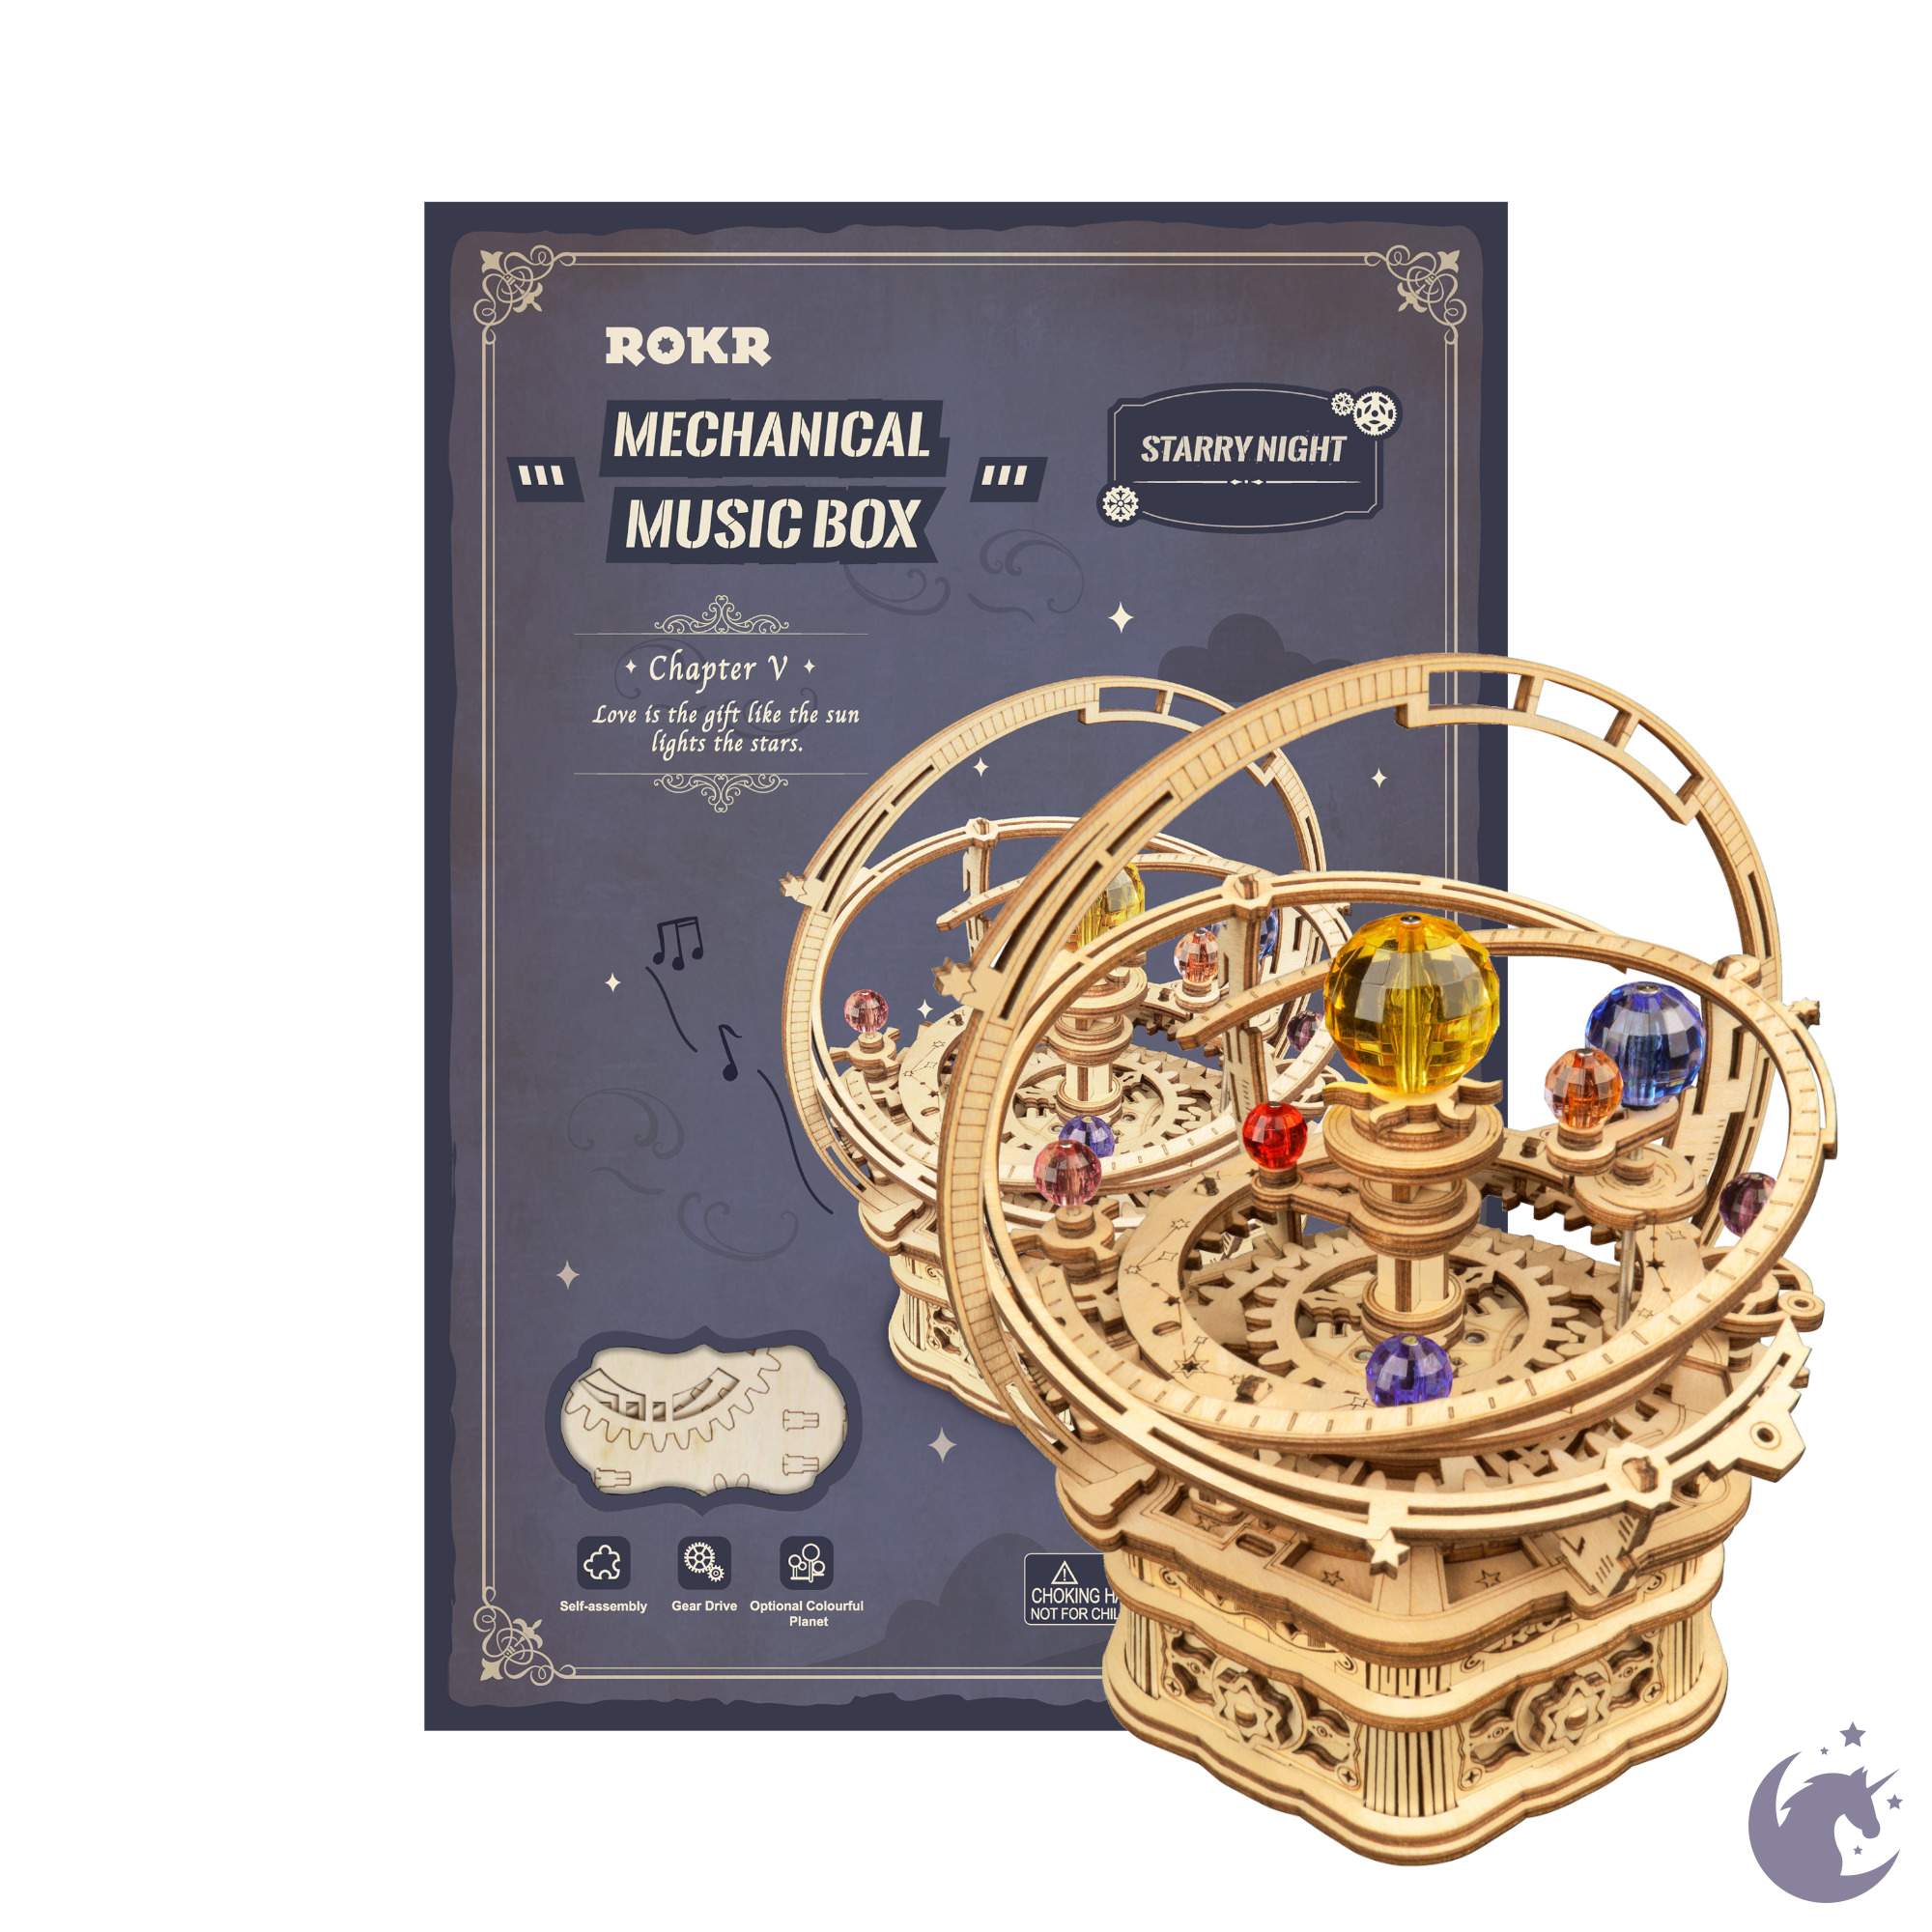 unicorntoys_robotime_rokr_diy_mechanical_music_box_3D_wooden_puzzle_game_assembly_model_building_kits_engineering_toys_for_Teens_AMK_51_5_fbf907ce-b0a8-4795-a8f3-caccf0d917de.jpg